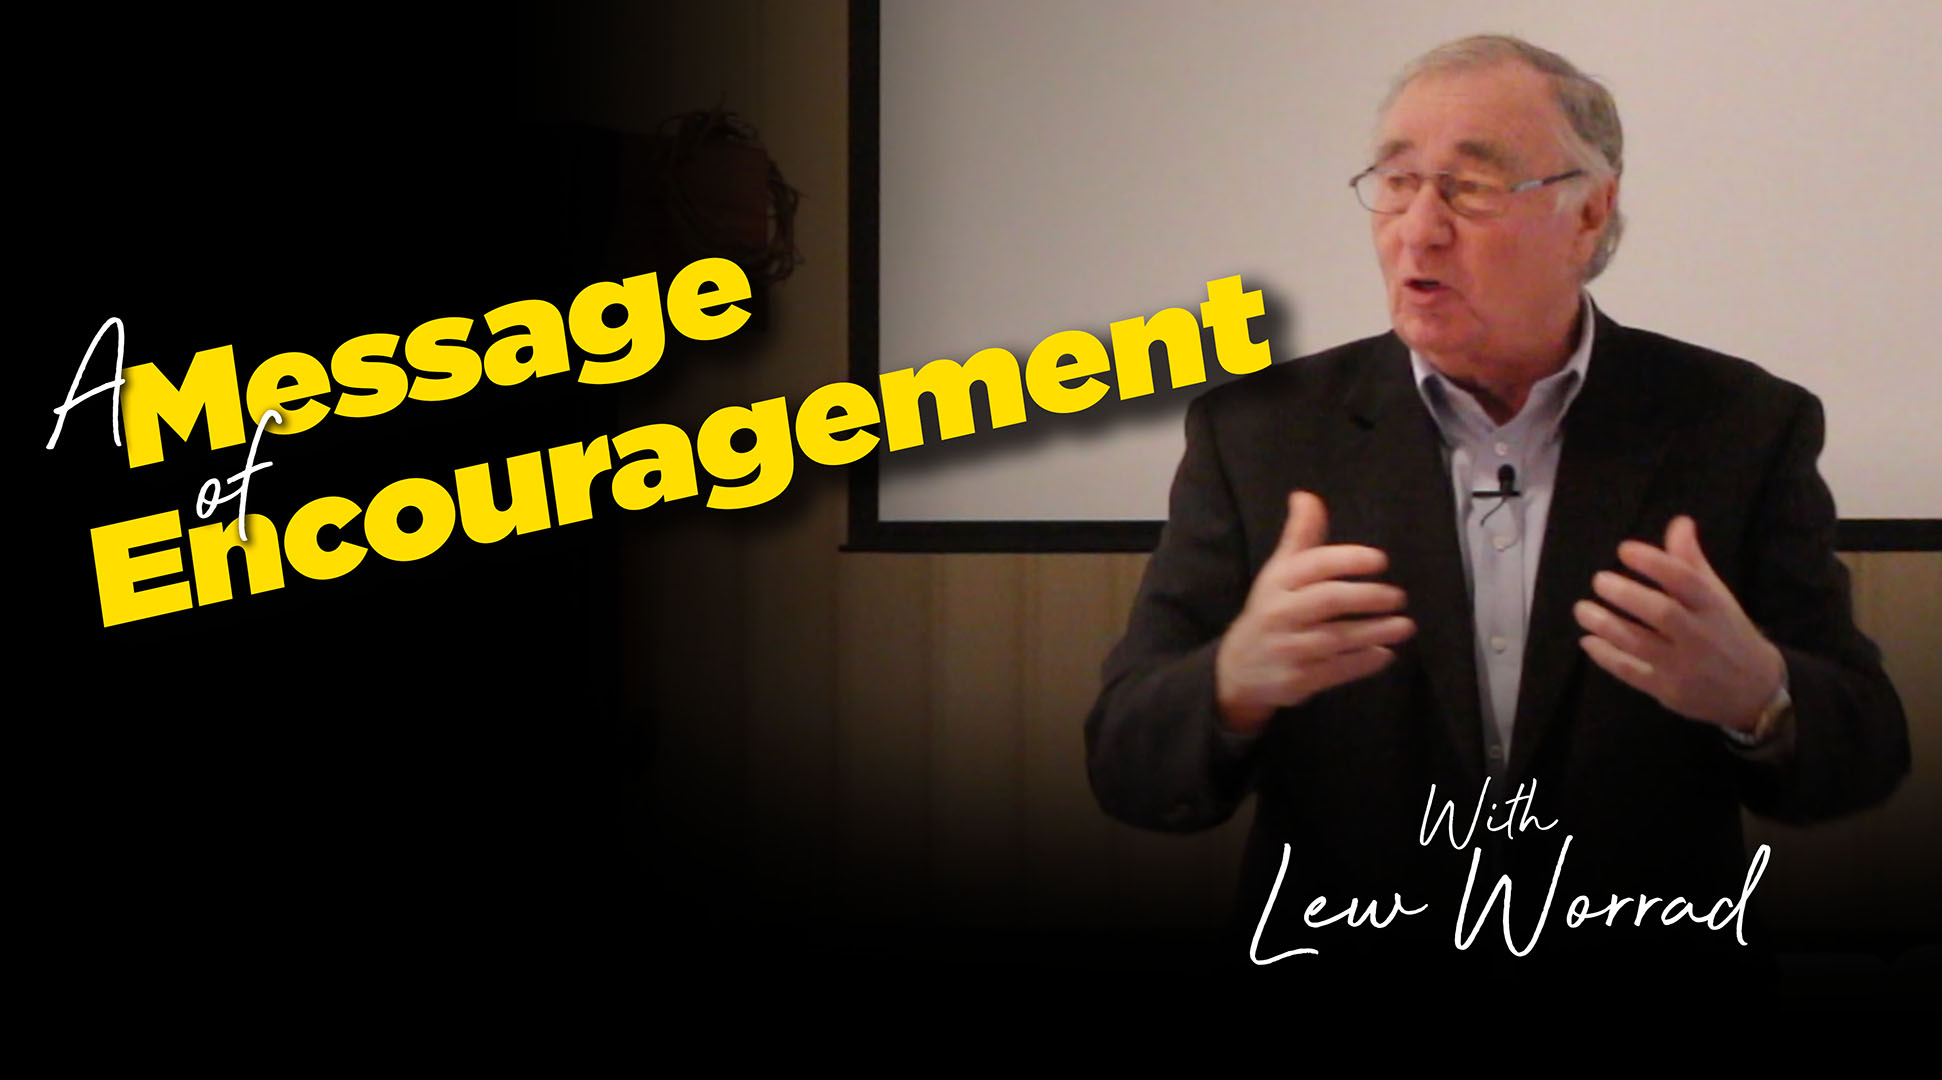 A Message of Encouragement from Lew Worrad